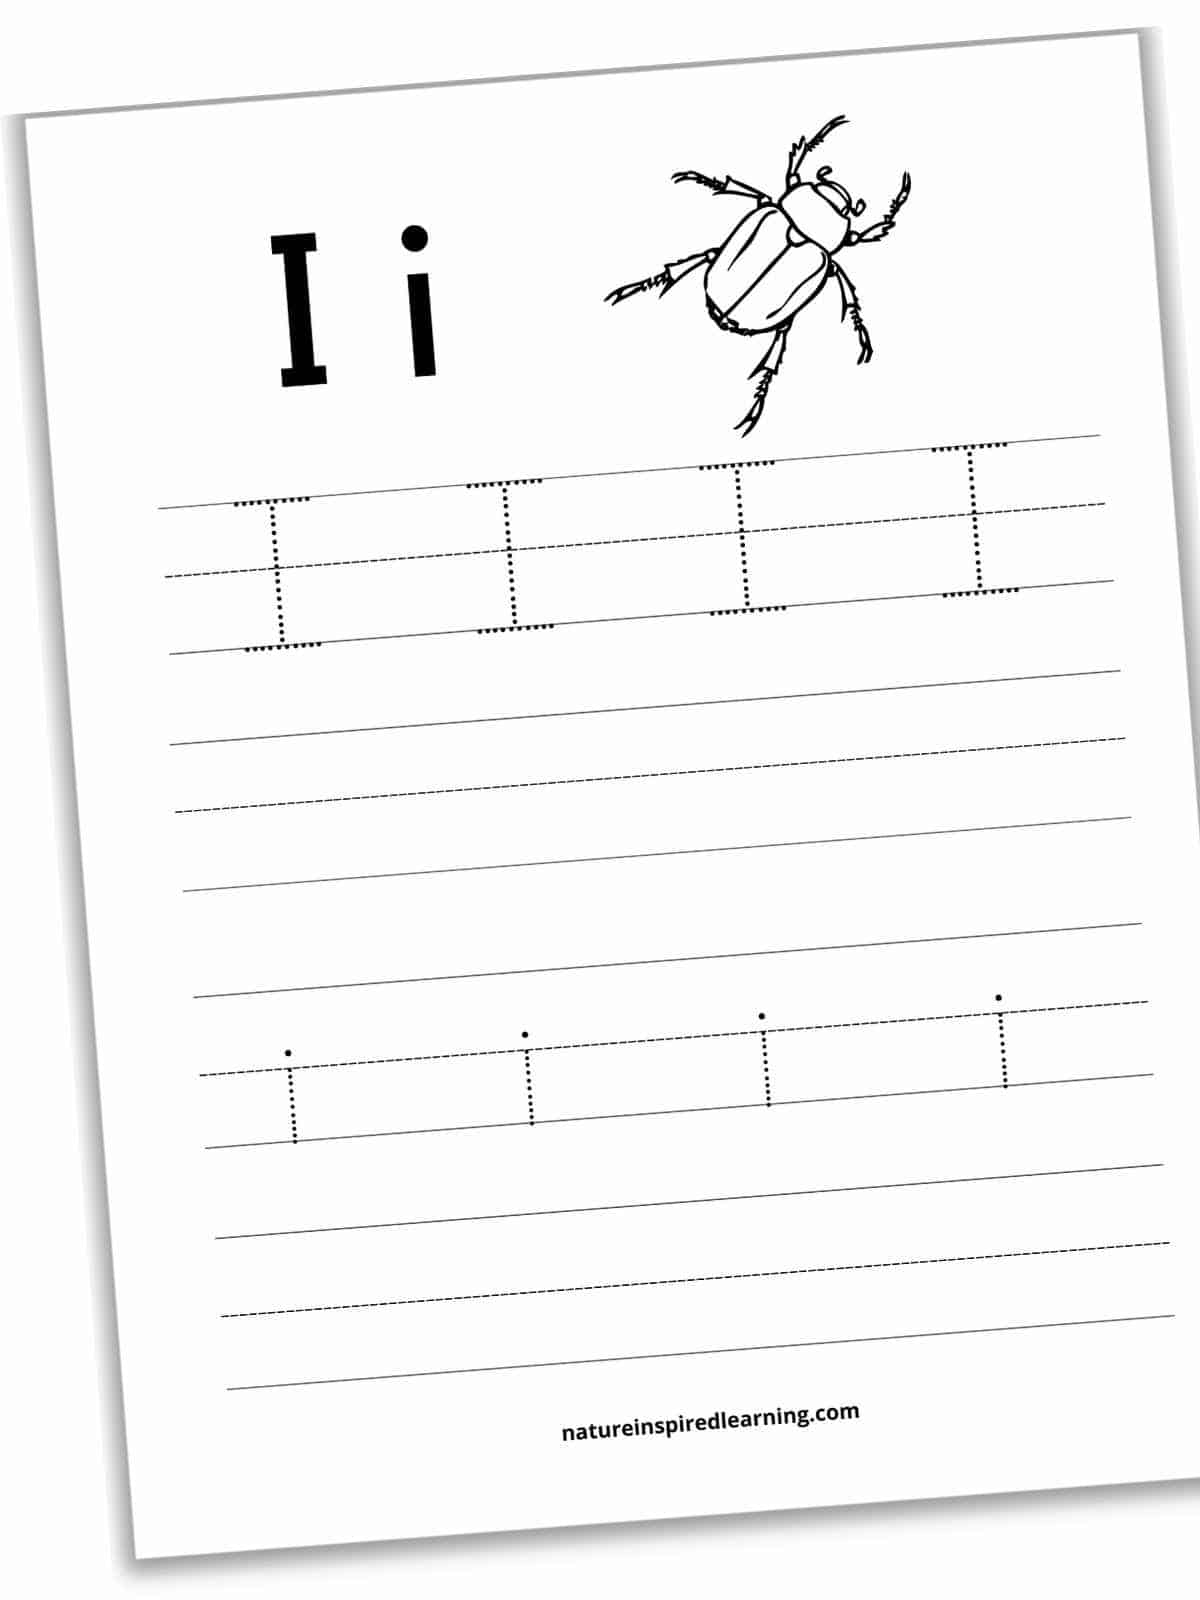 Worksheet with I and i in bold with a black and white insect across the top and a set of four lines below. Four dotted I's on the first set of lines and a blank set of lines below. Four lowercase i's on the third set of lines with a blank set below.